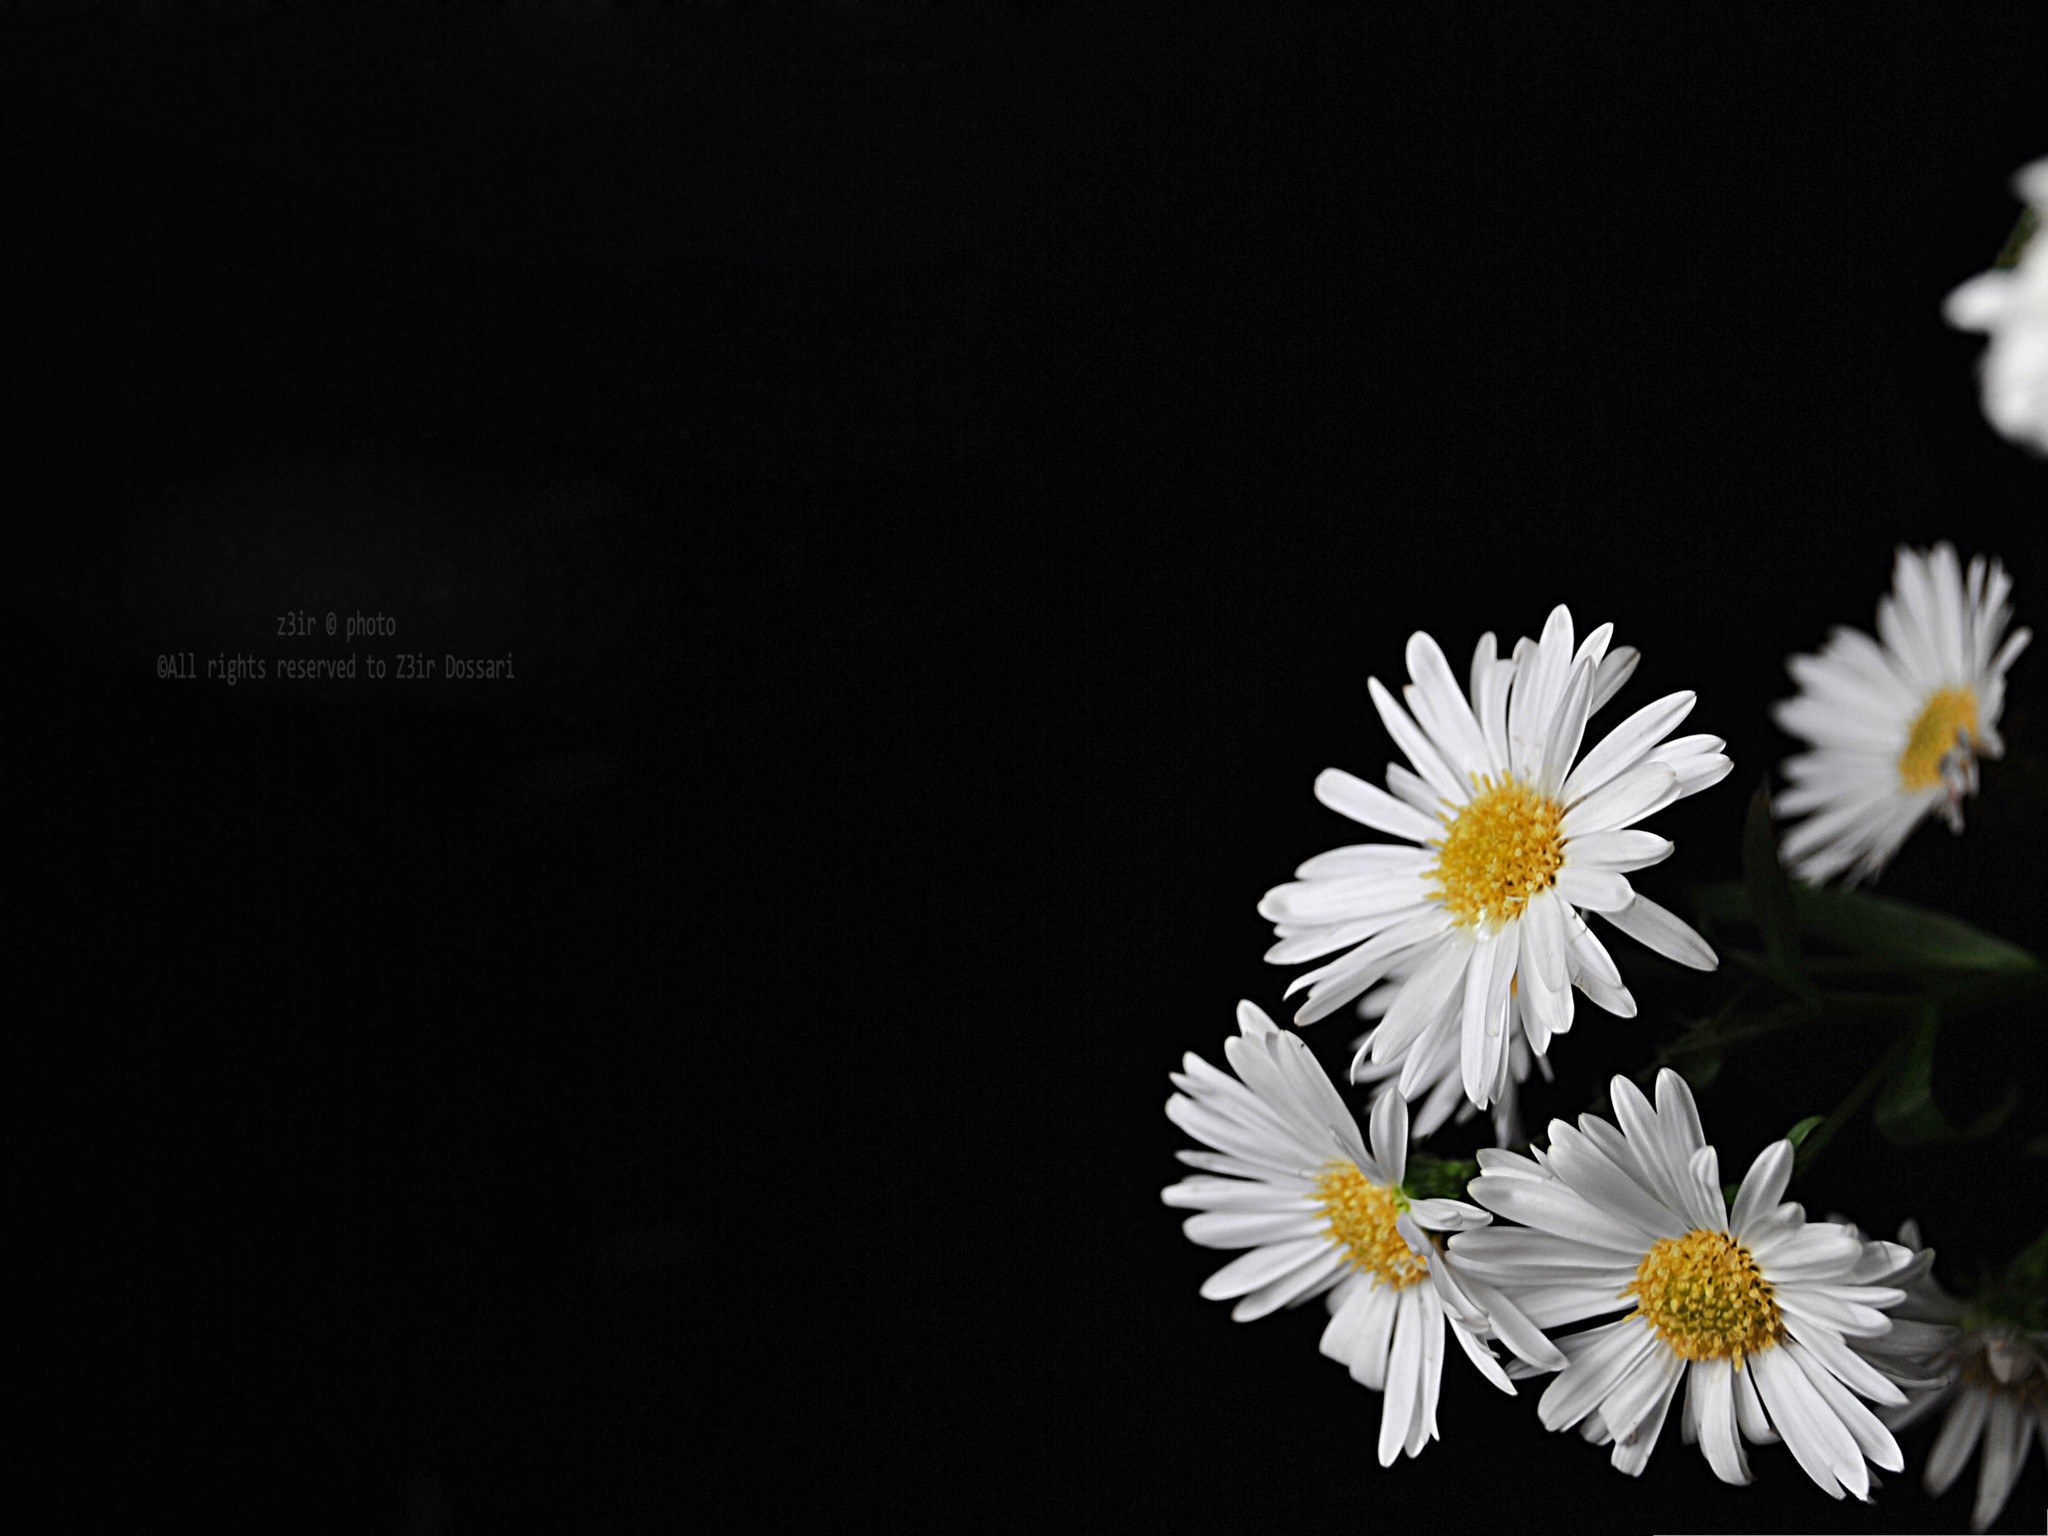 2048x1536 Flowers Put Against Black Background 2048X1536 free wallpaper download .